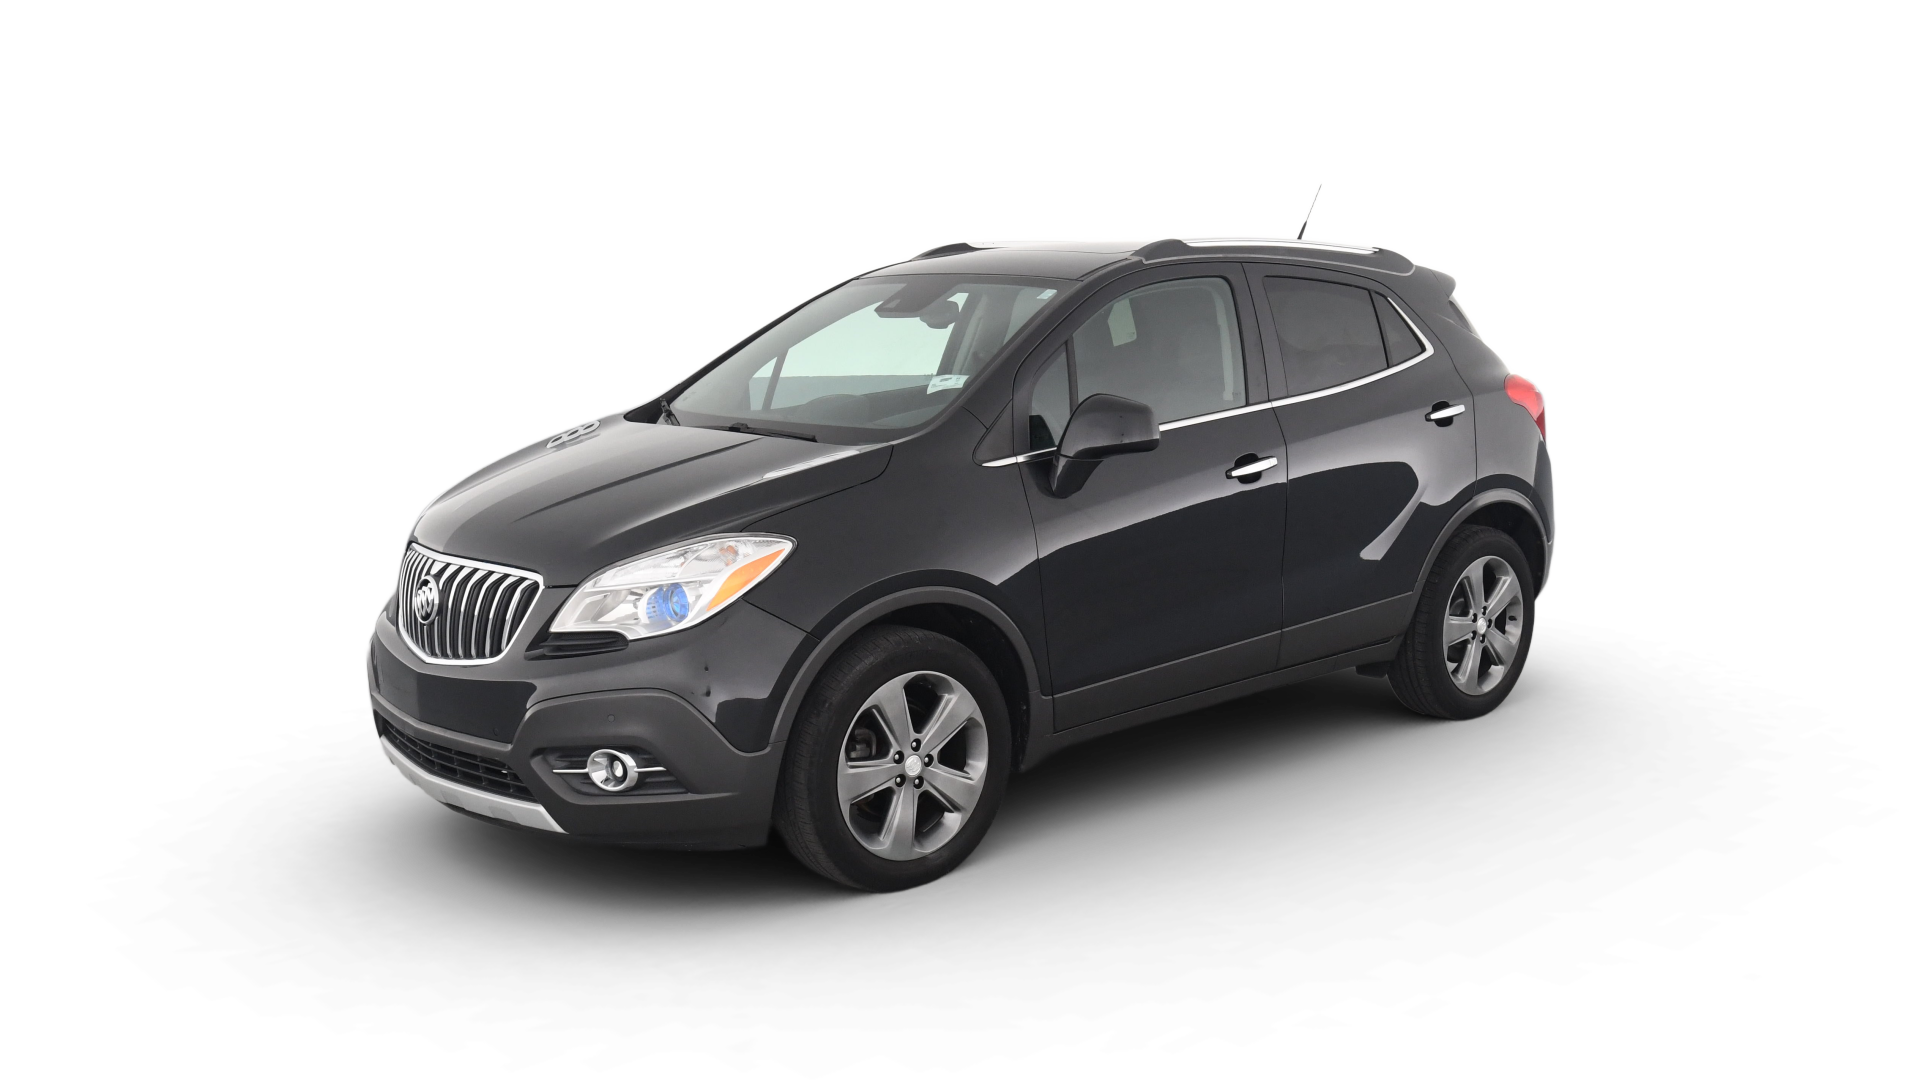 Used 2013 Buick Encore For Sale Online | Carvana